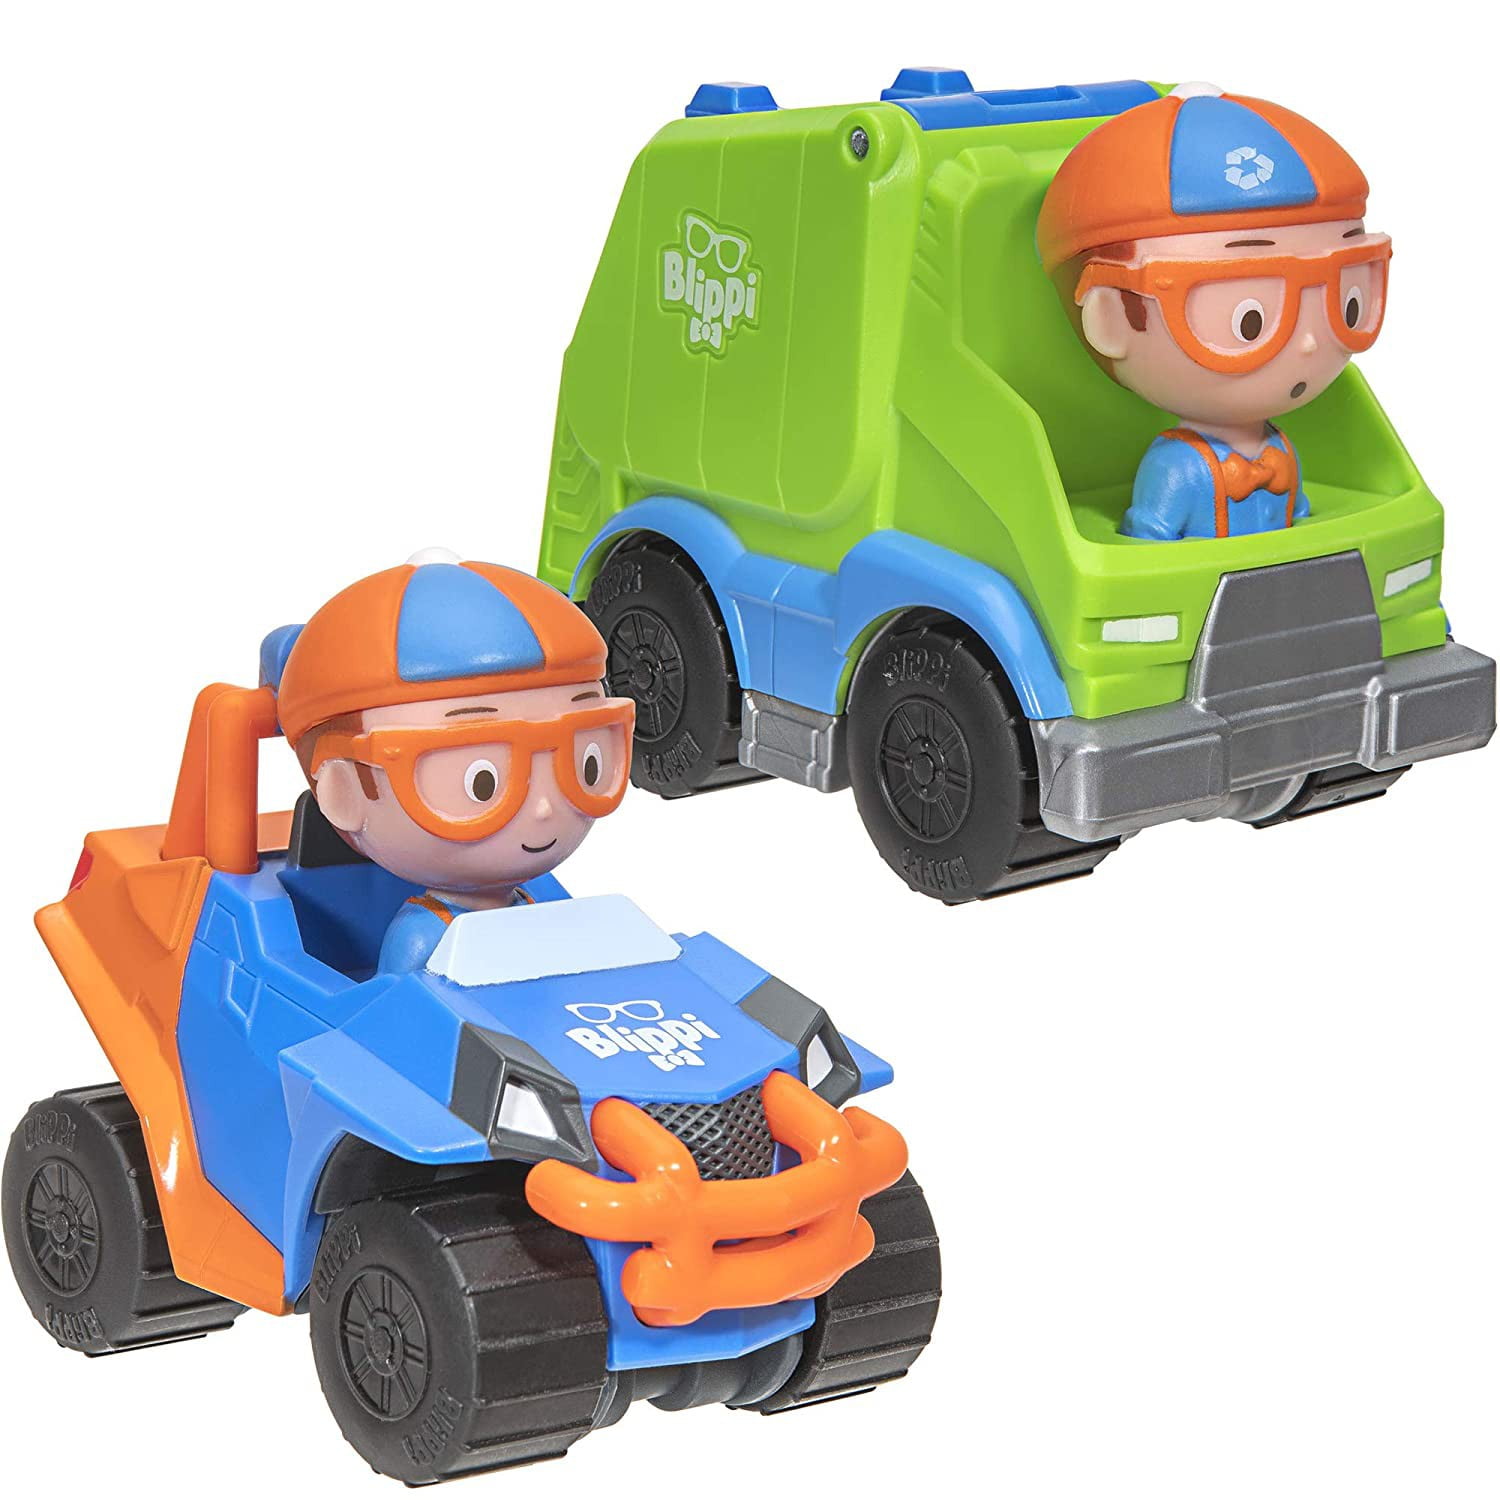 Blippi Mini Vehicles Including Excavator and Fire Truck Each With a Character for sale online 